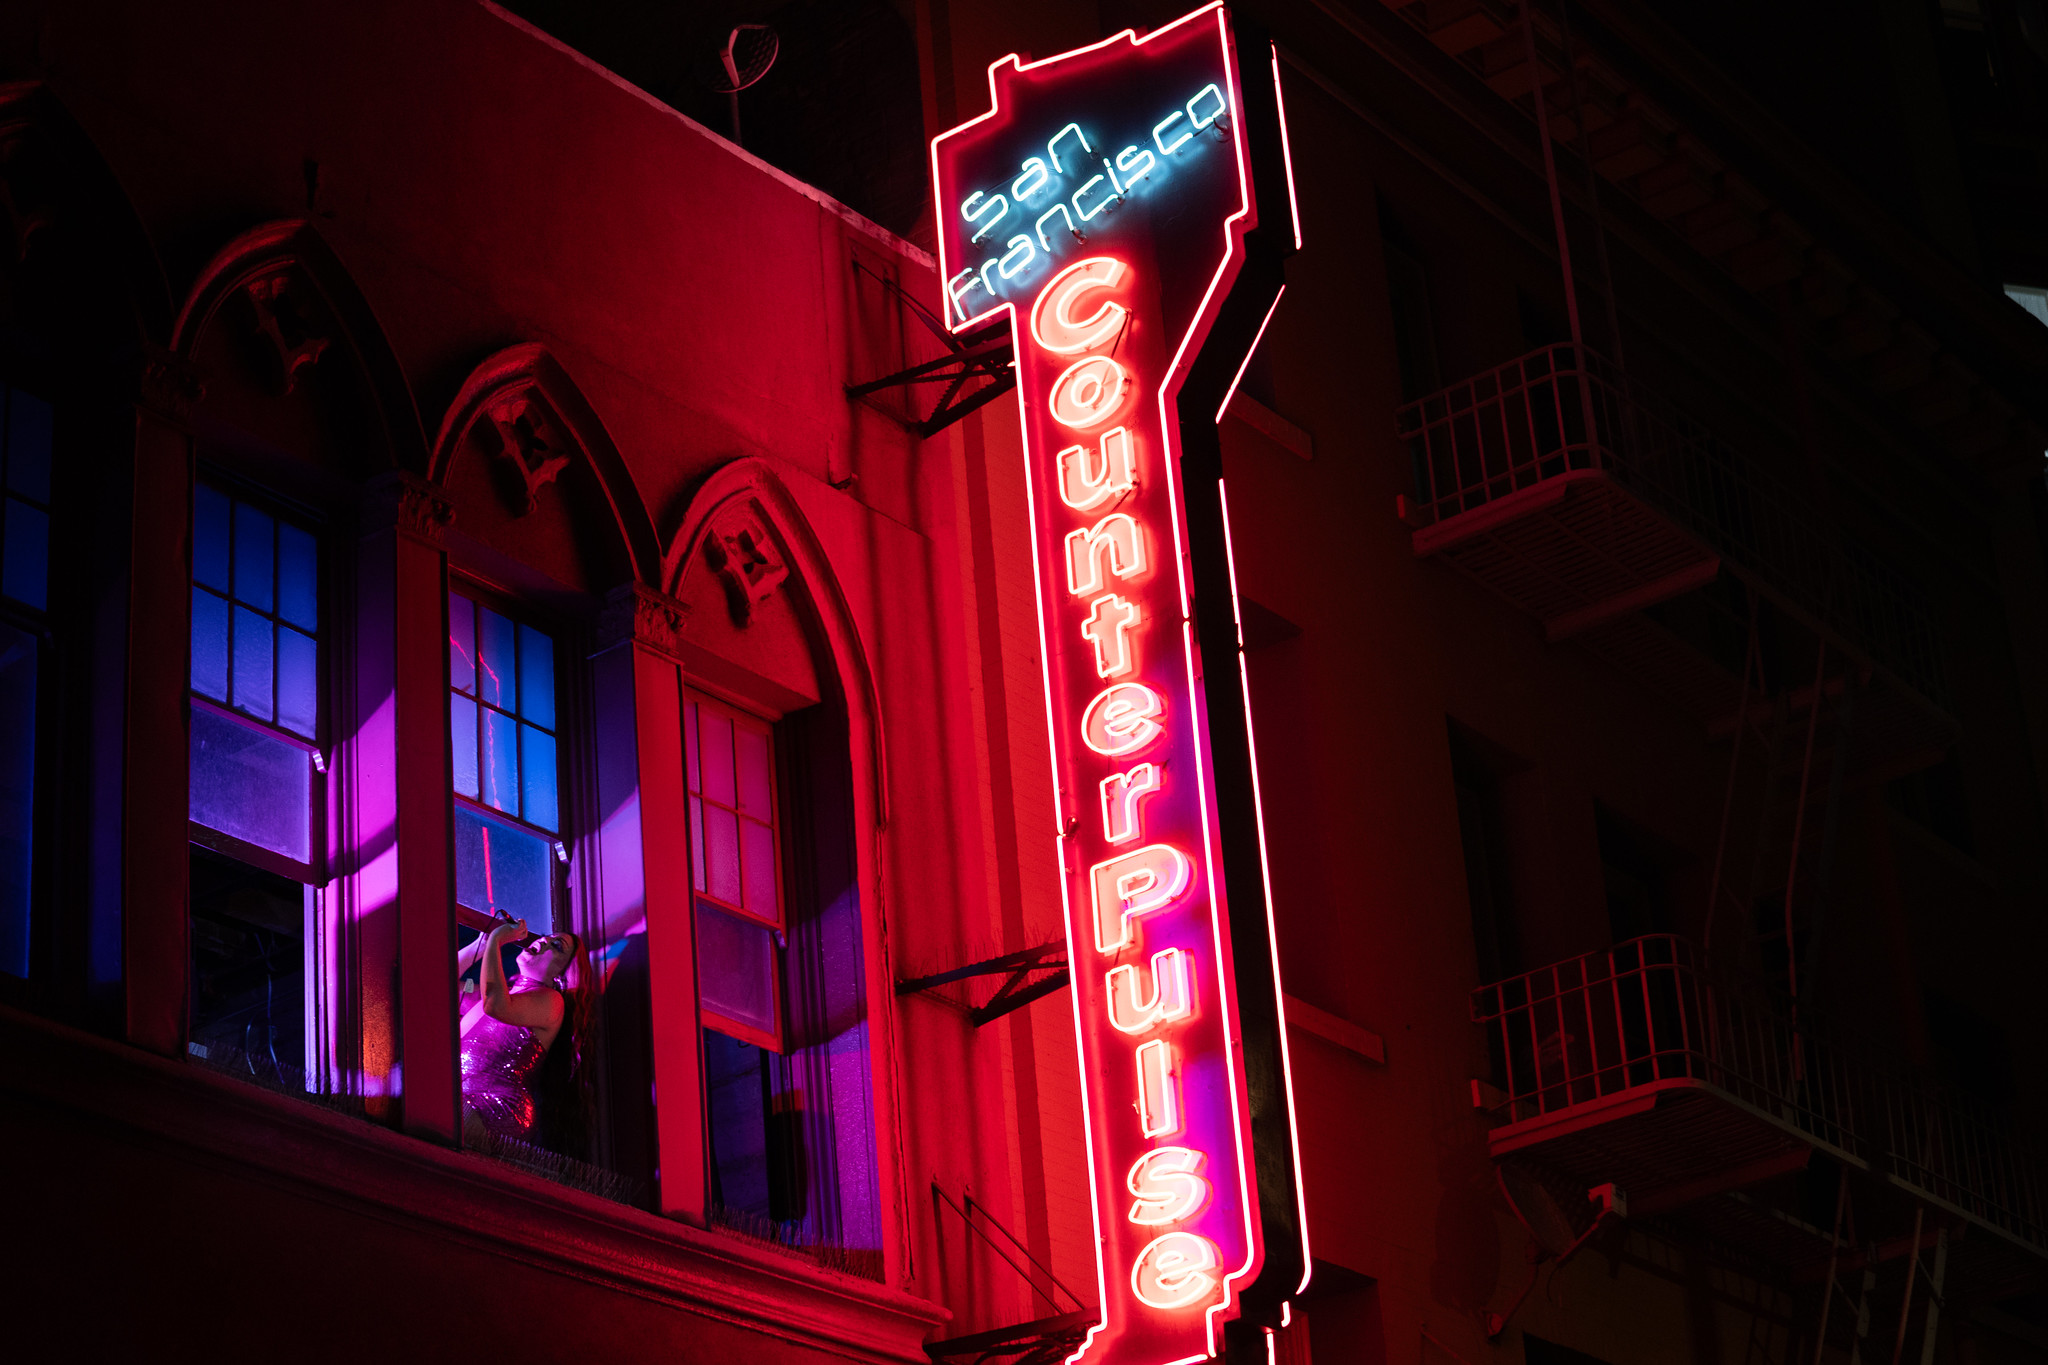 A drag performer sings through the windows of CounterPulse, with it's neon lights illuminating the building